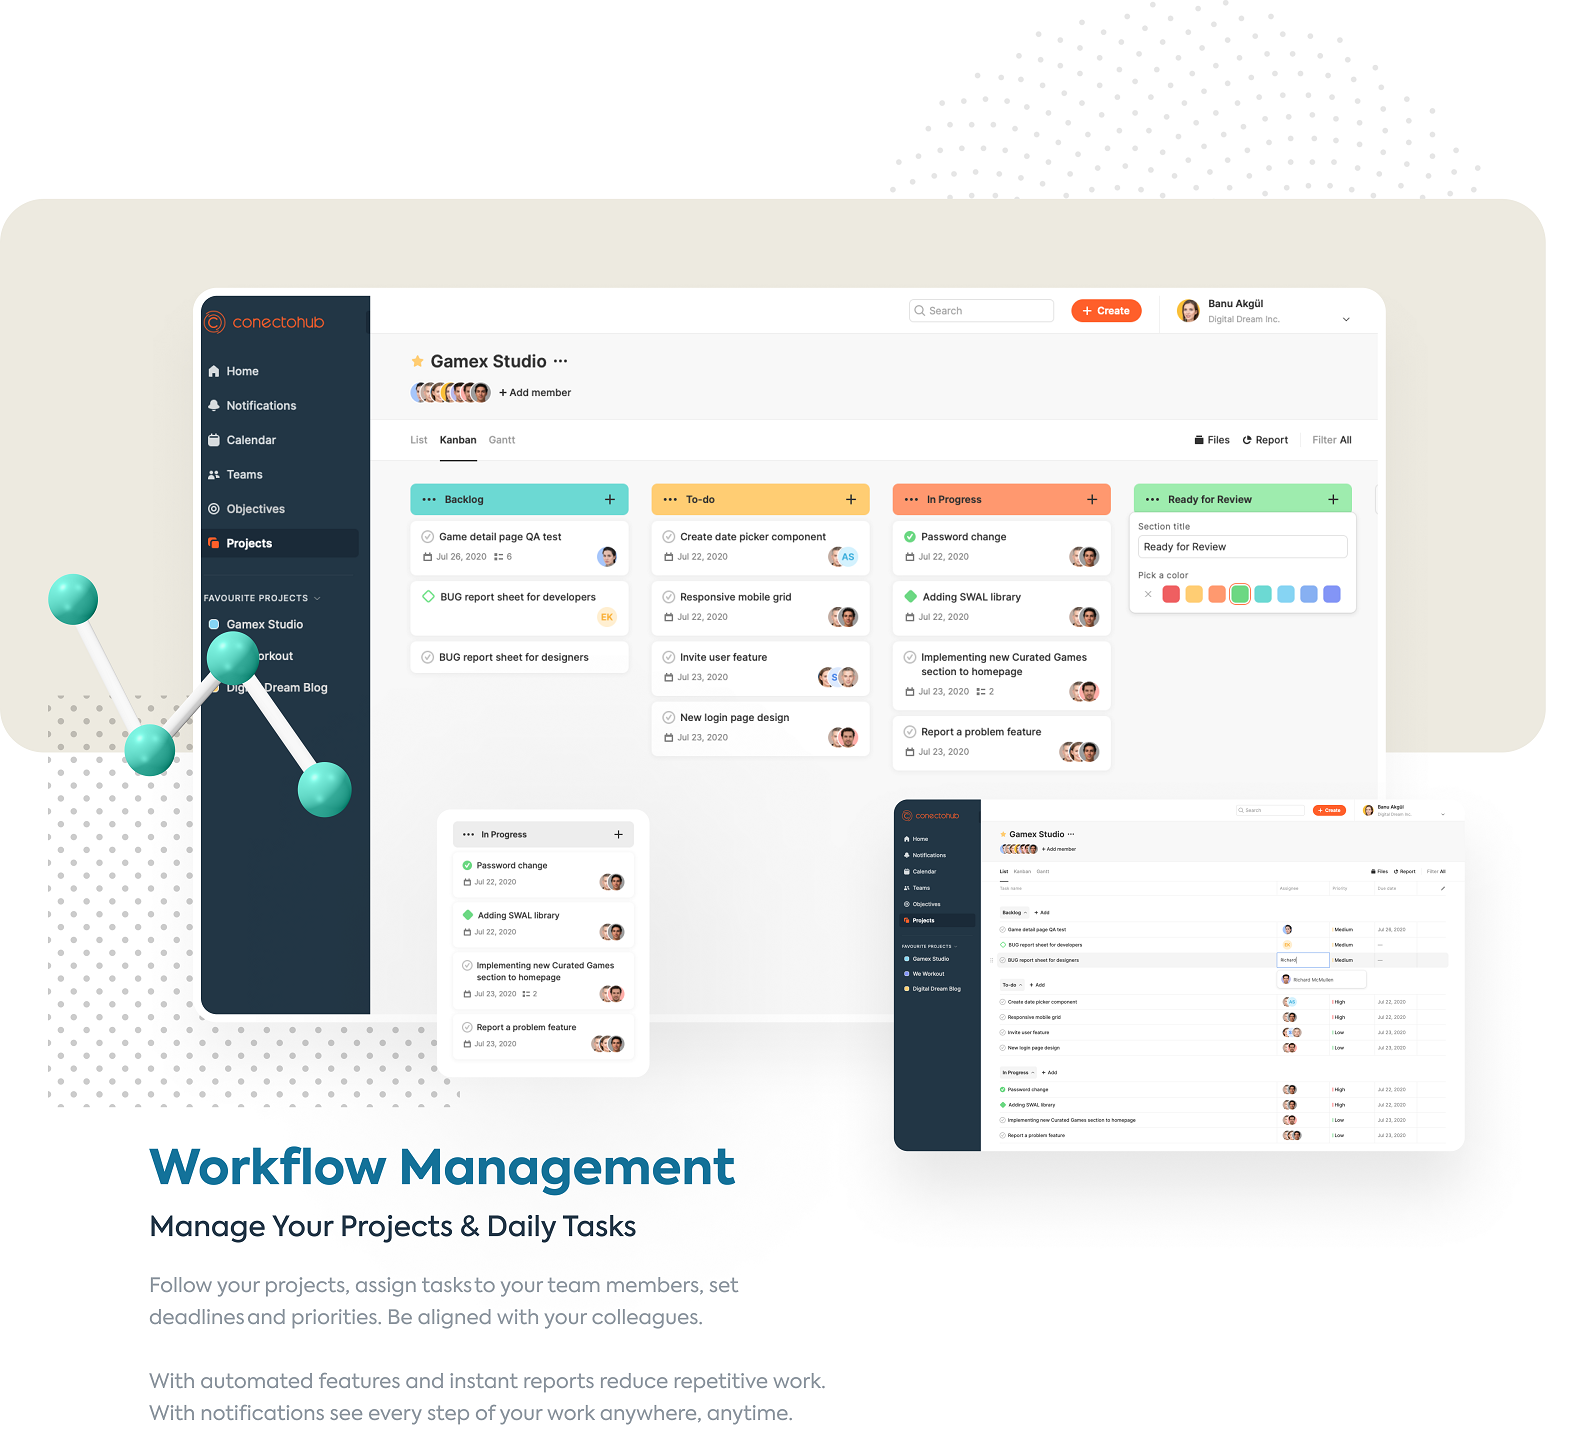 Workflow Management Manage Your Projects & Daily Tasks Follow your projects, assign tasks to your team members, set deadlines and priorities. Be aligned wit your colleagues. With automated features and instant reports reduce repetitive work. With notifications see every step of your work anywhere, anytime.